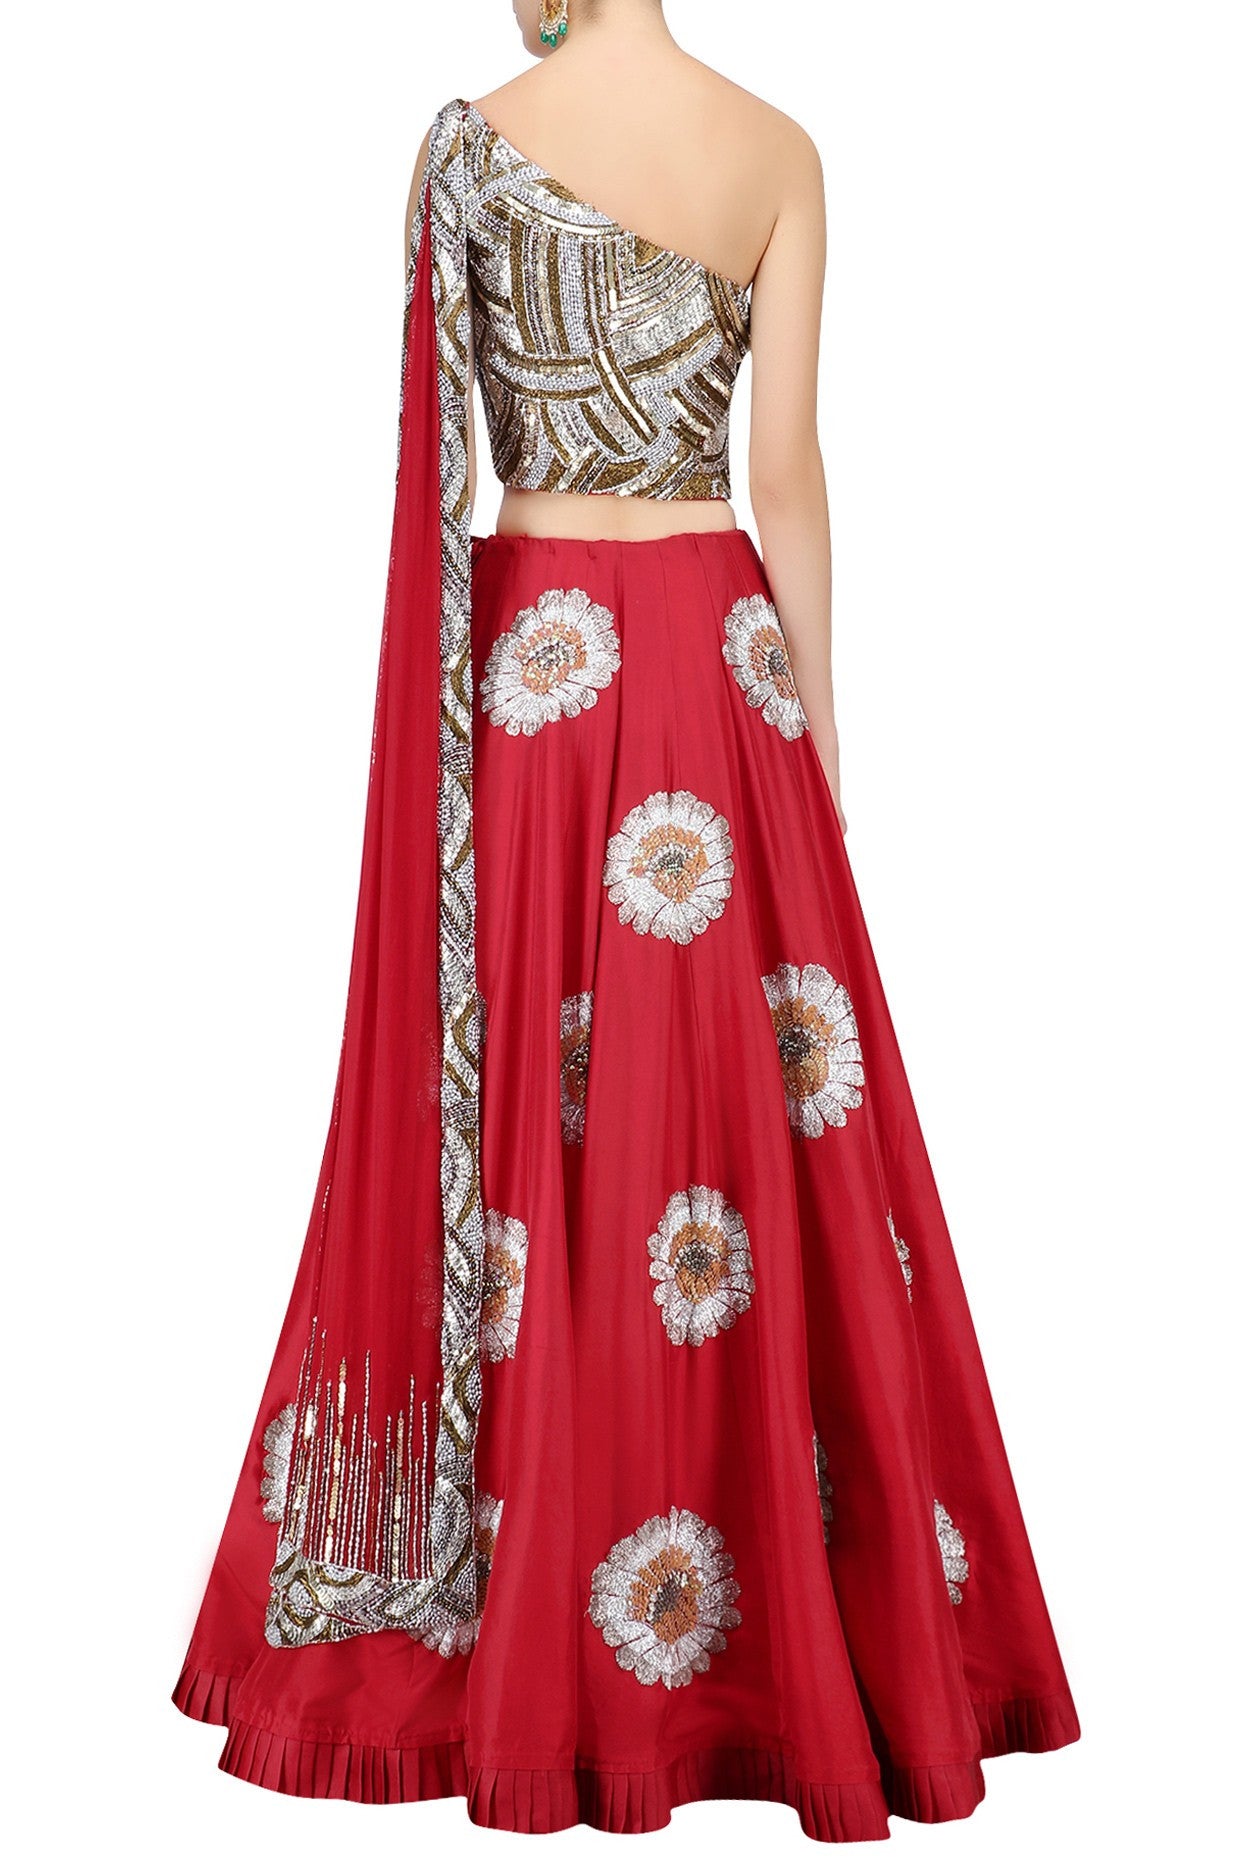 Red Color Lehenga with One Shoulder Blouse